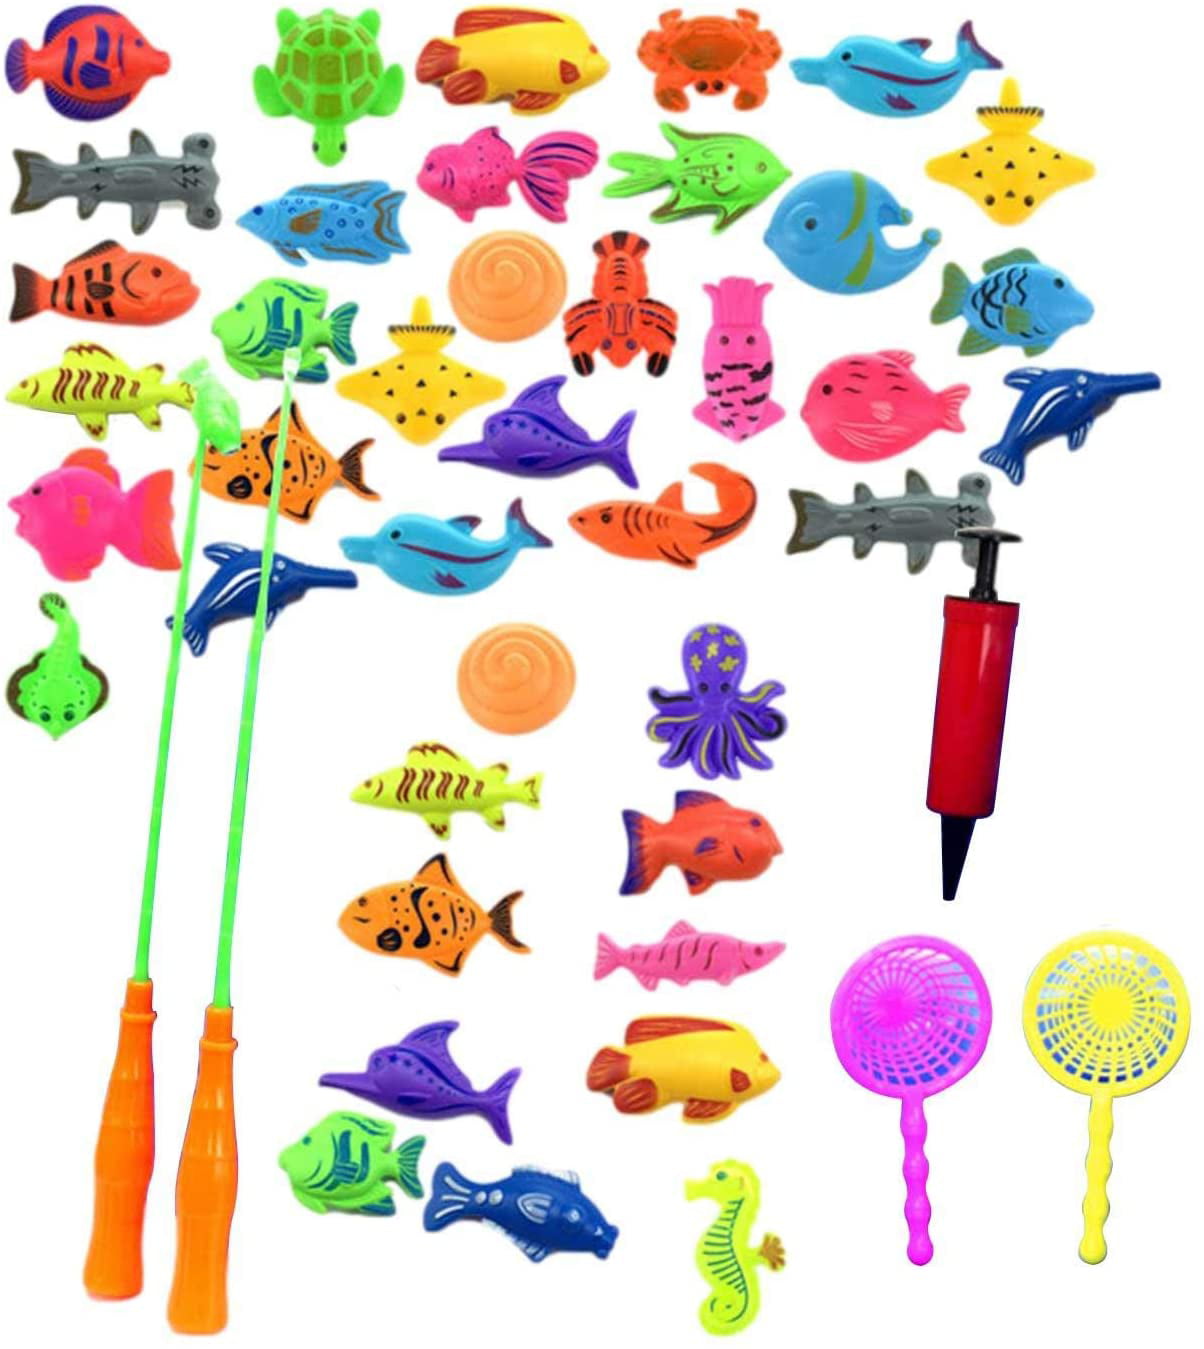 Magnetic Fishing Game Pool Toys for Kids 45 Piece Fishing Toy with Fishing Pole Waterproof Floating Magnet Fishing Play in Bathtub Bath Toys Water Fish Toys for Kids Toddlers Toys Age 3 4 5 6 Year Old 